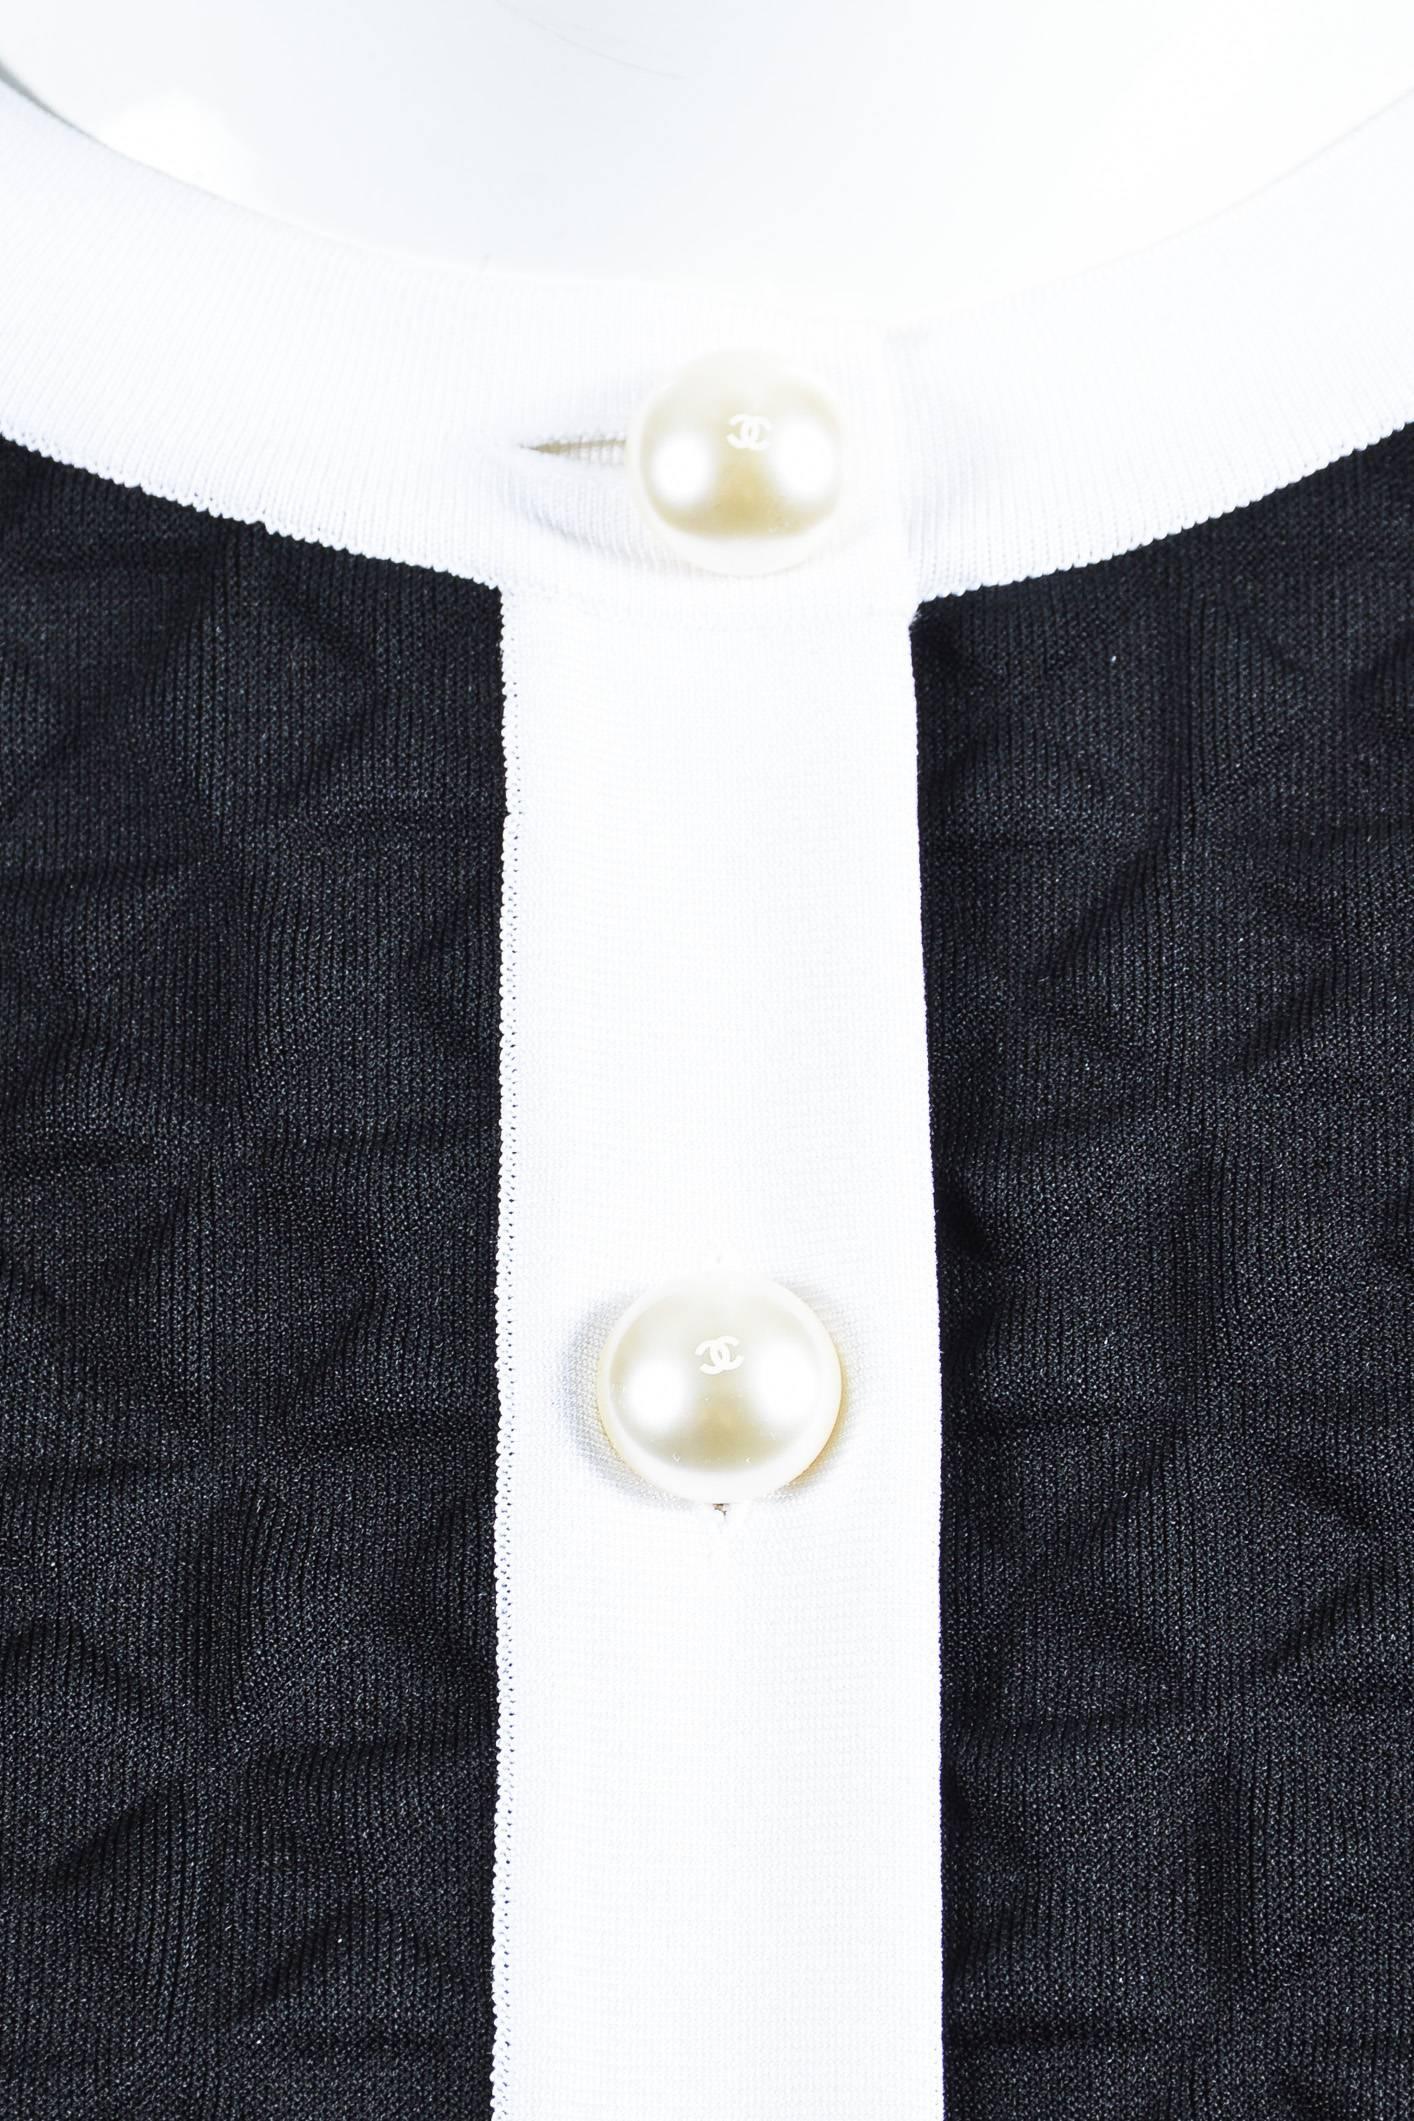 Women's Chanel New With Tag $4245 Black White Textured Faux Pearl Button LS Jacket SZ 40 For Sale